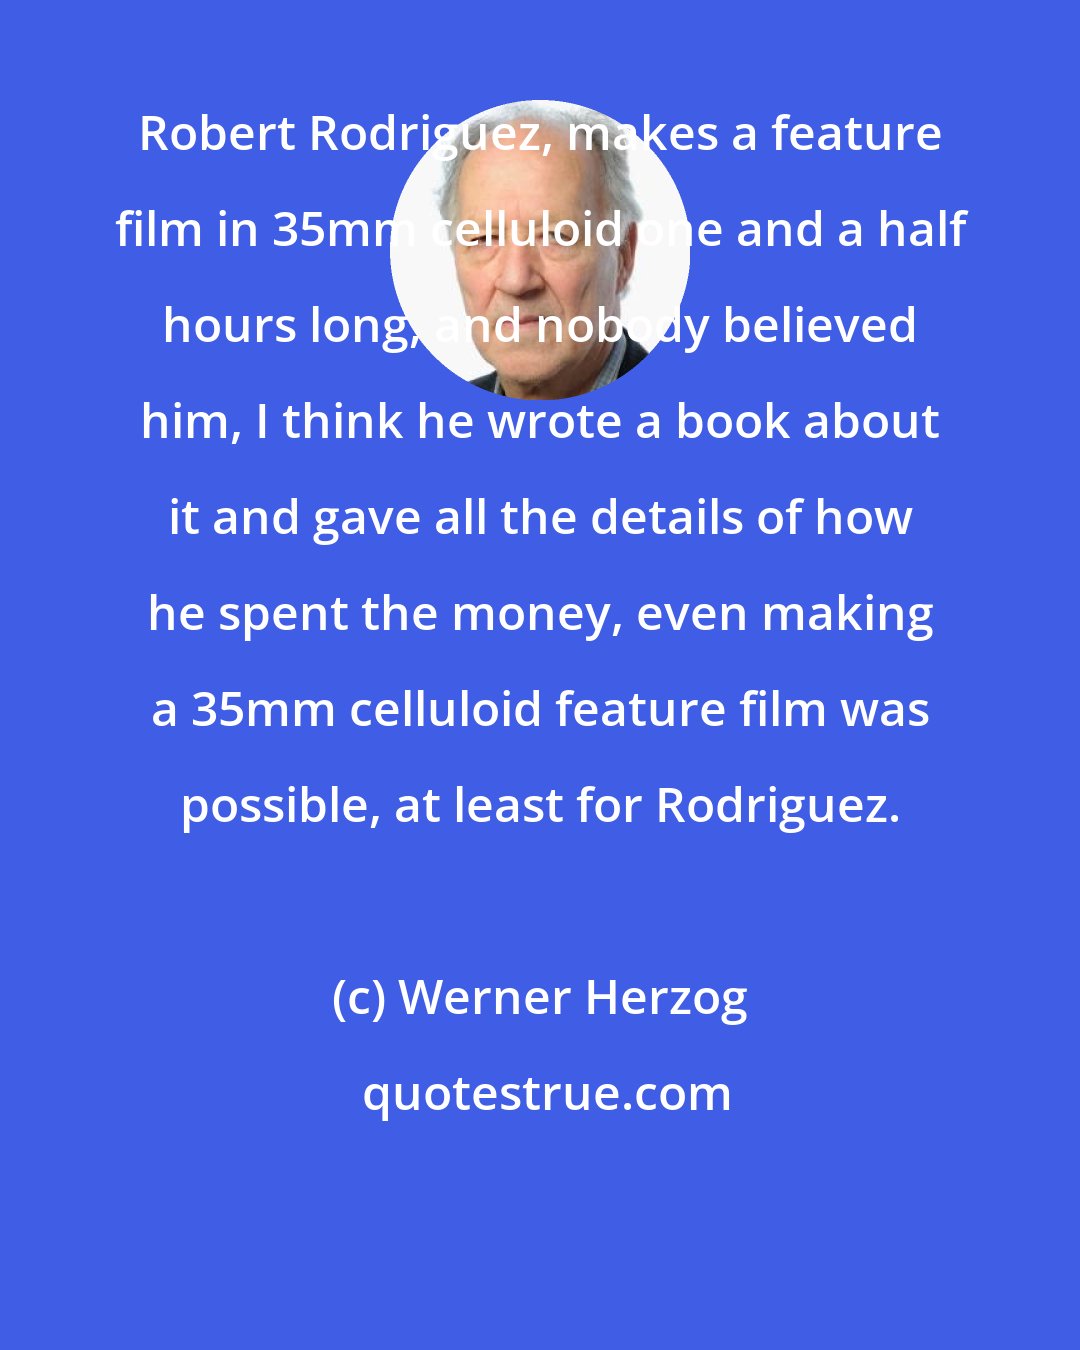 Werner Herzog: Robert Rodriguez, makes a feature film in 35mm celluloid one and a half hours long, and nobody believed him, I think he wrote a book about it and gave all the details of how he spent the money, even making a 35mm celluloid feature film was possible, at least for Rodriguez.